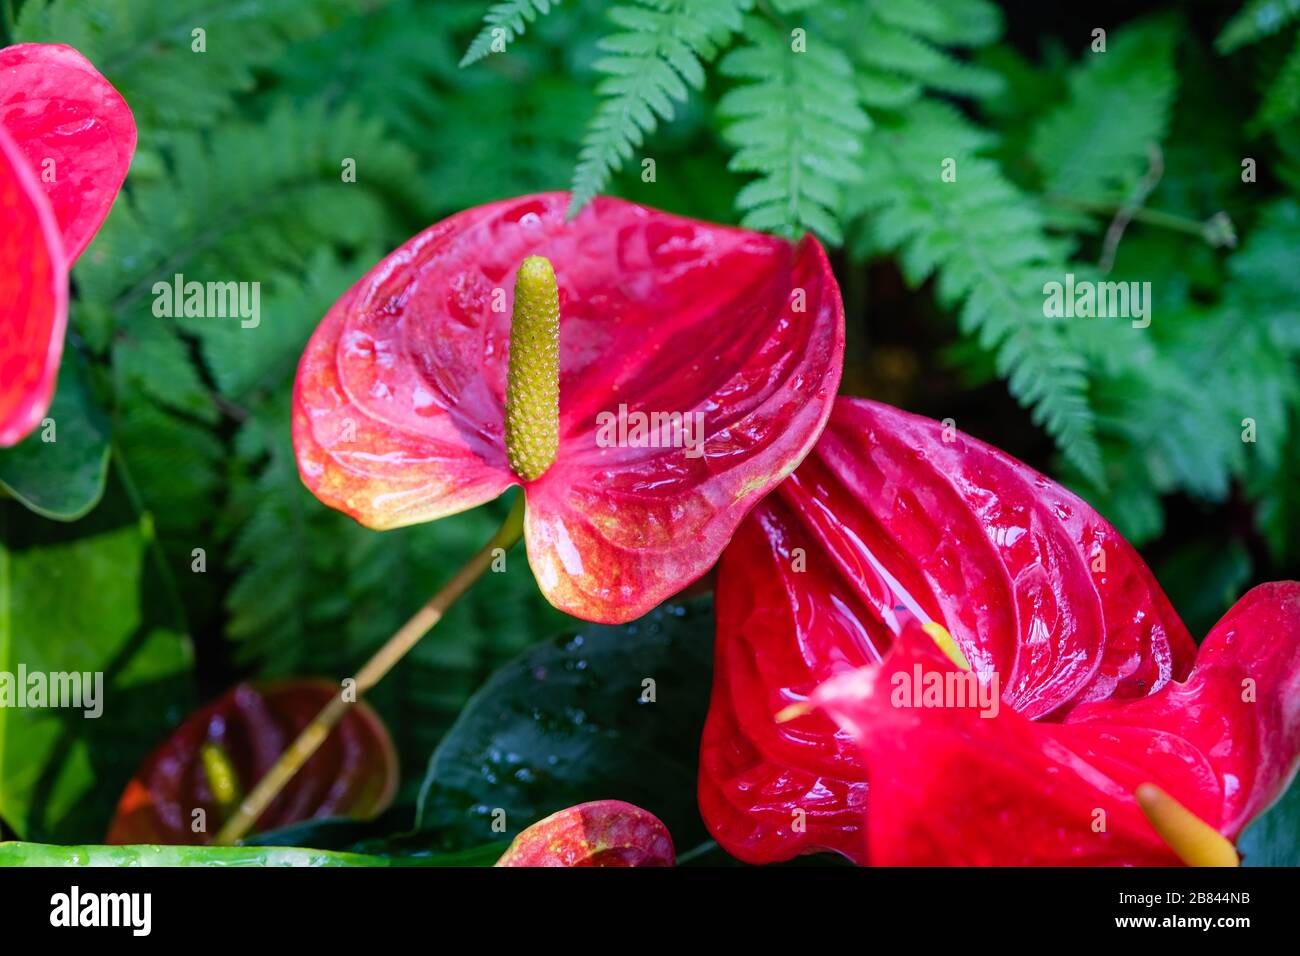 The Anthurium is a red heart-shaped flower. Dark green leaves as a background make the flowers stand out beautifully. Anthuriums have come to symboliz Stock Photo